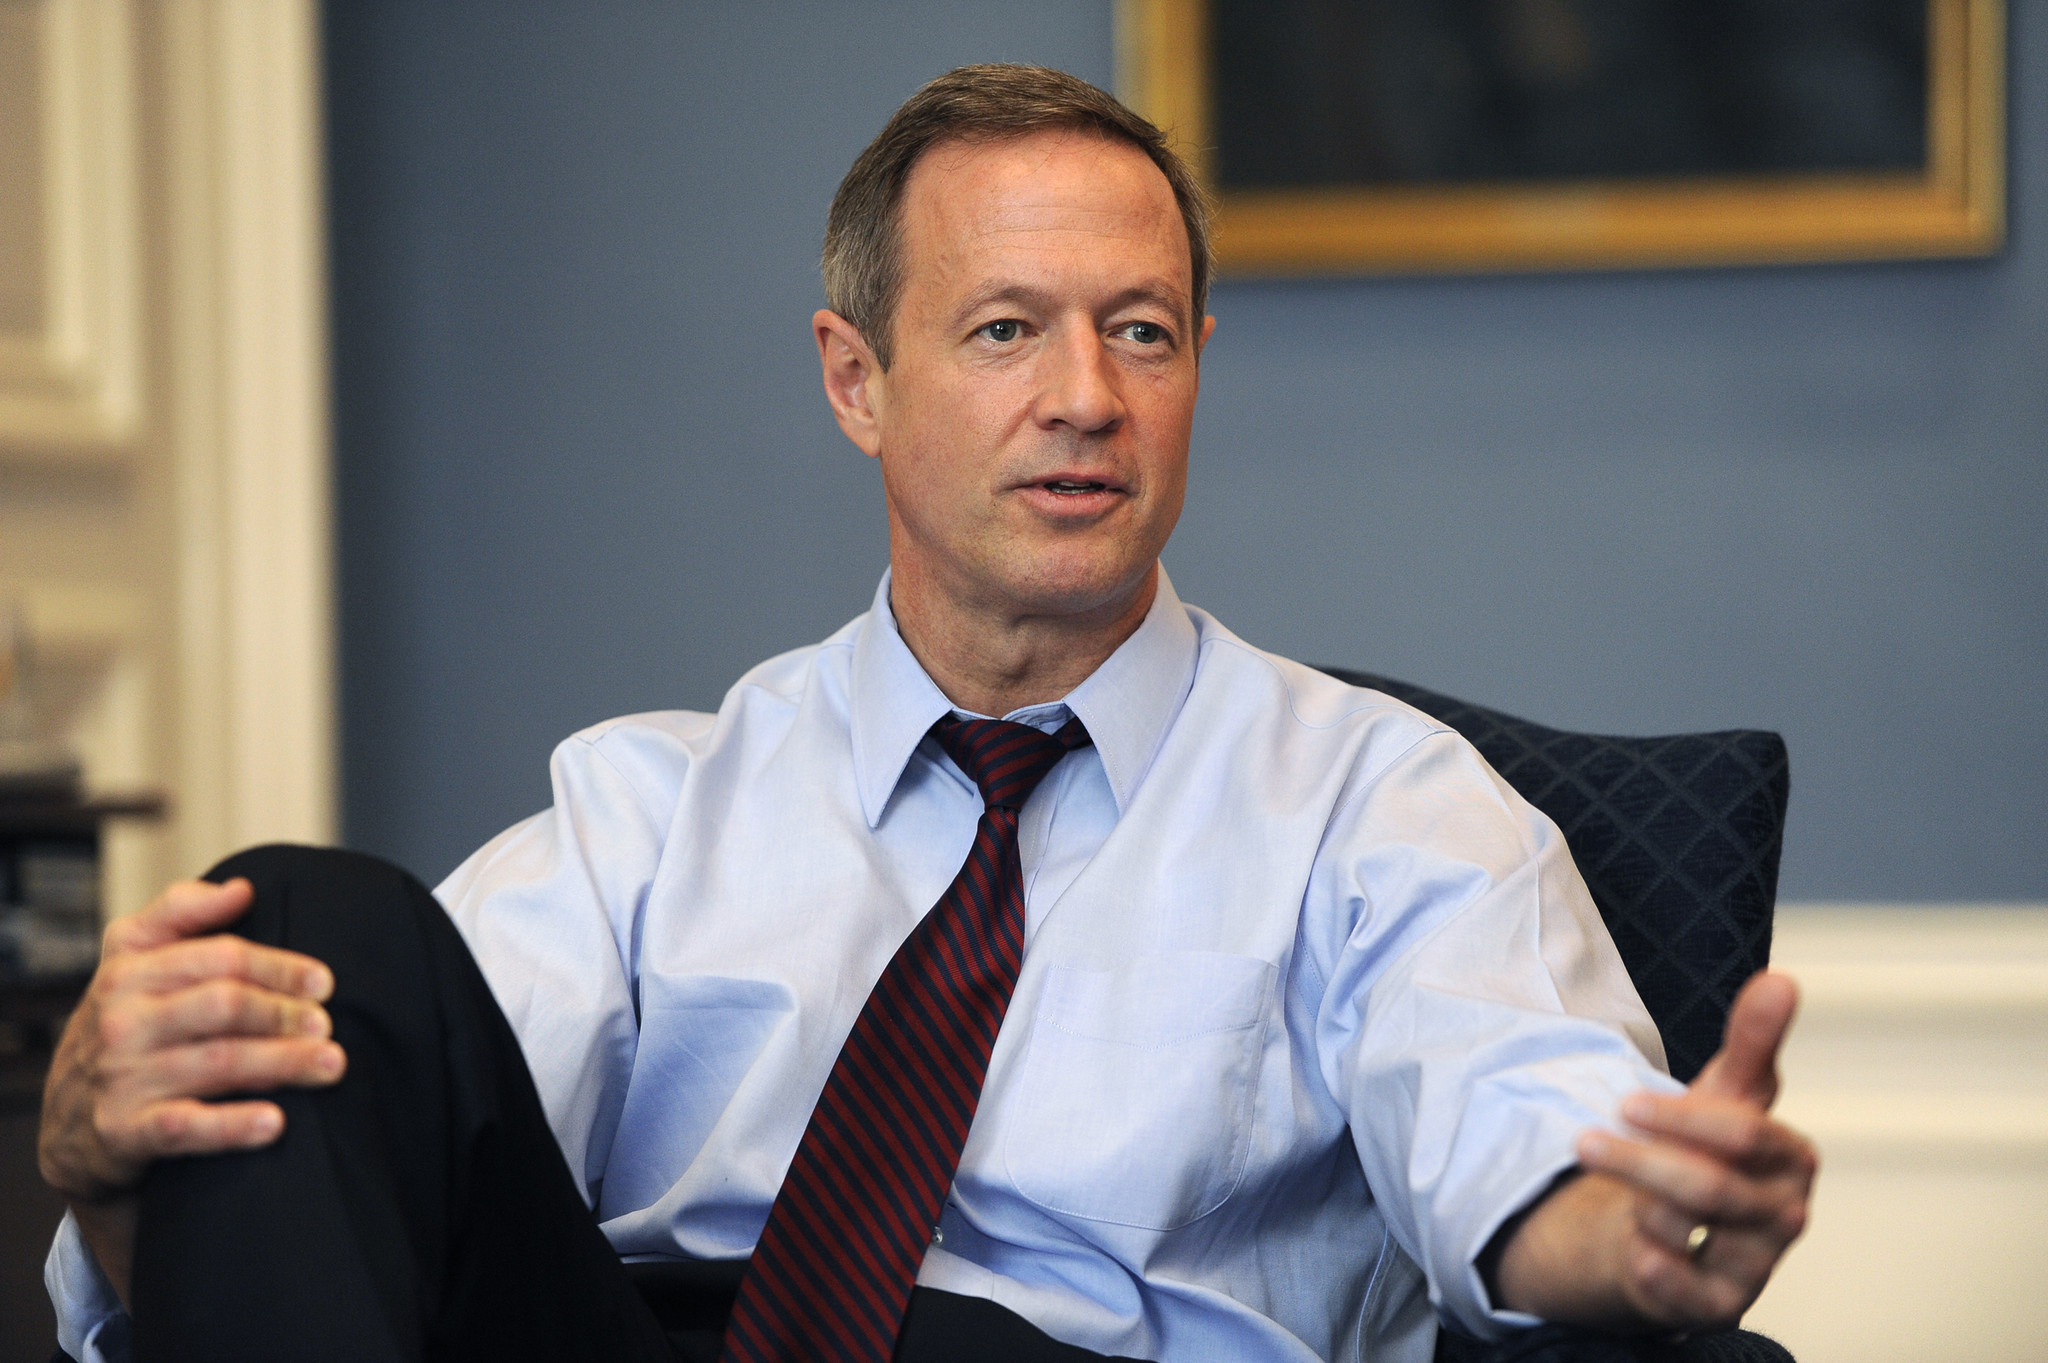 O’Malley Sworn In as New Social Security Commissioner